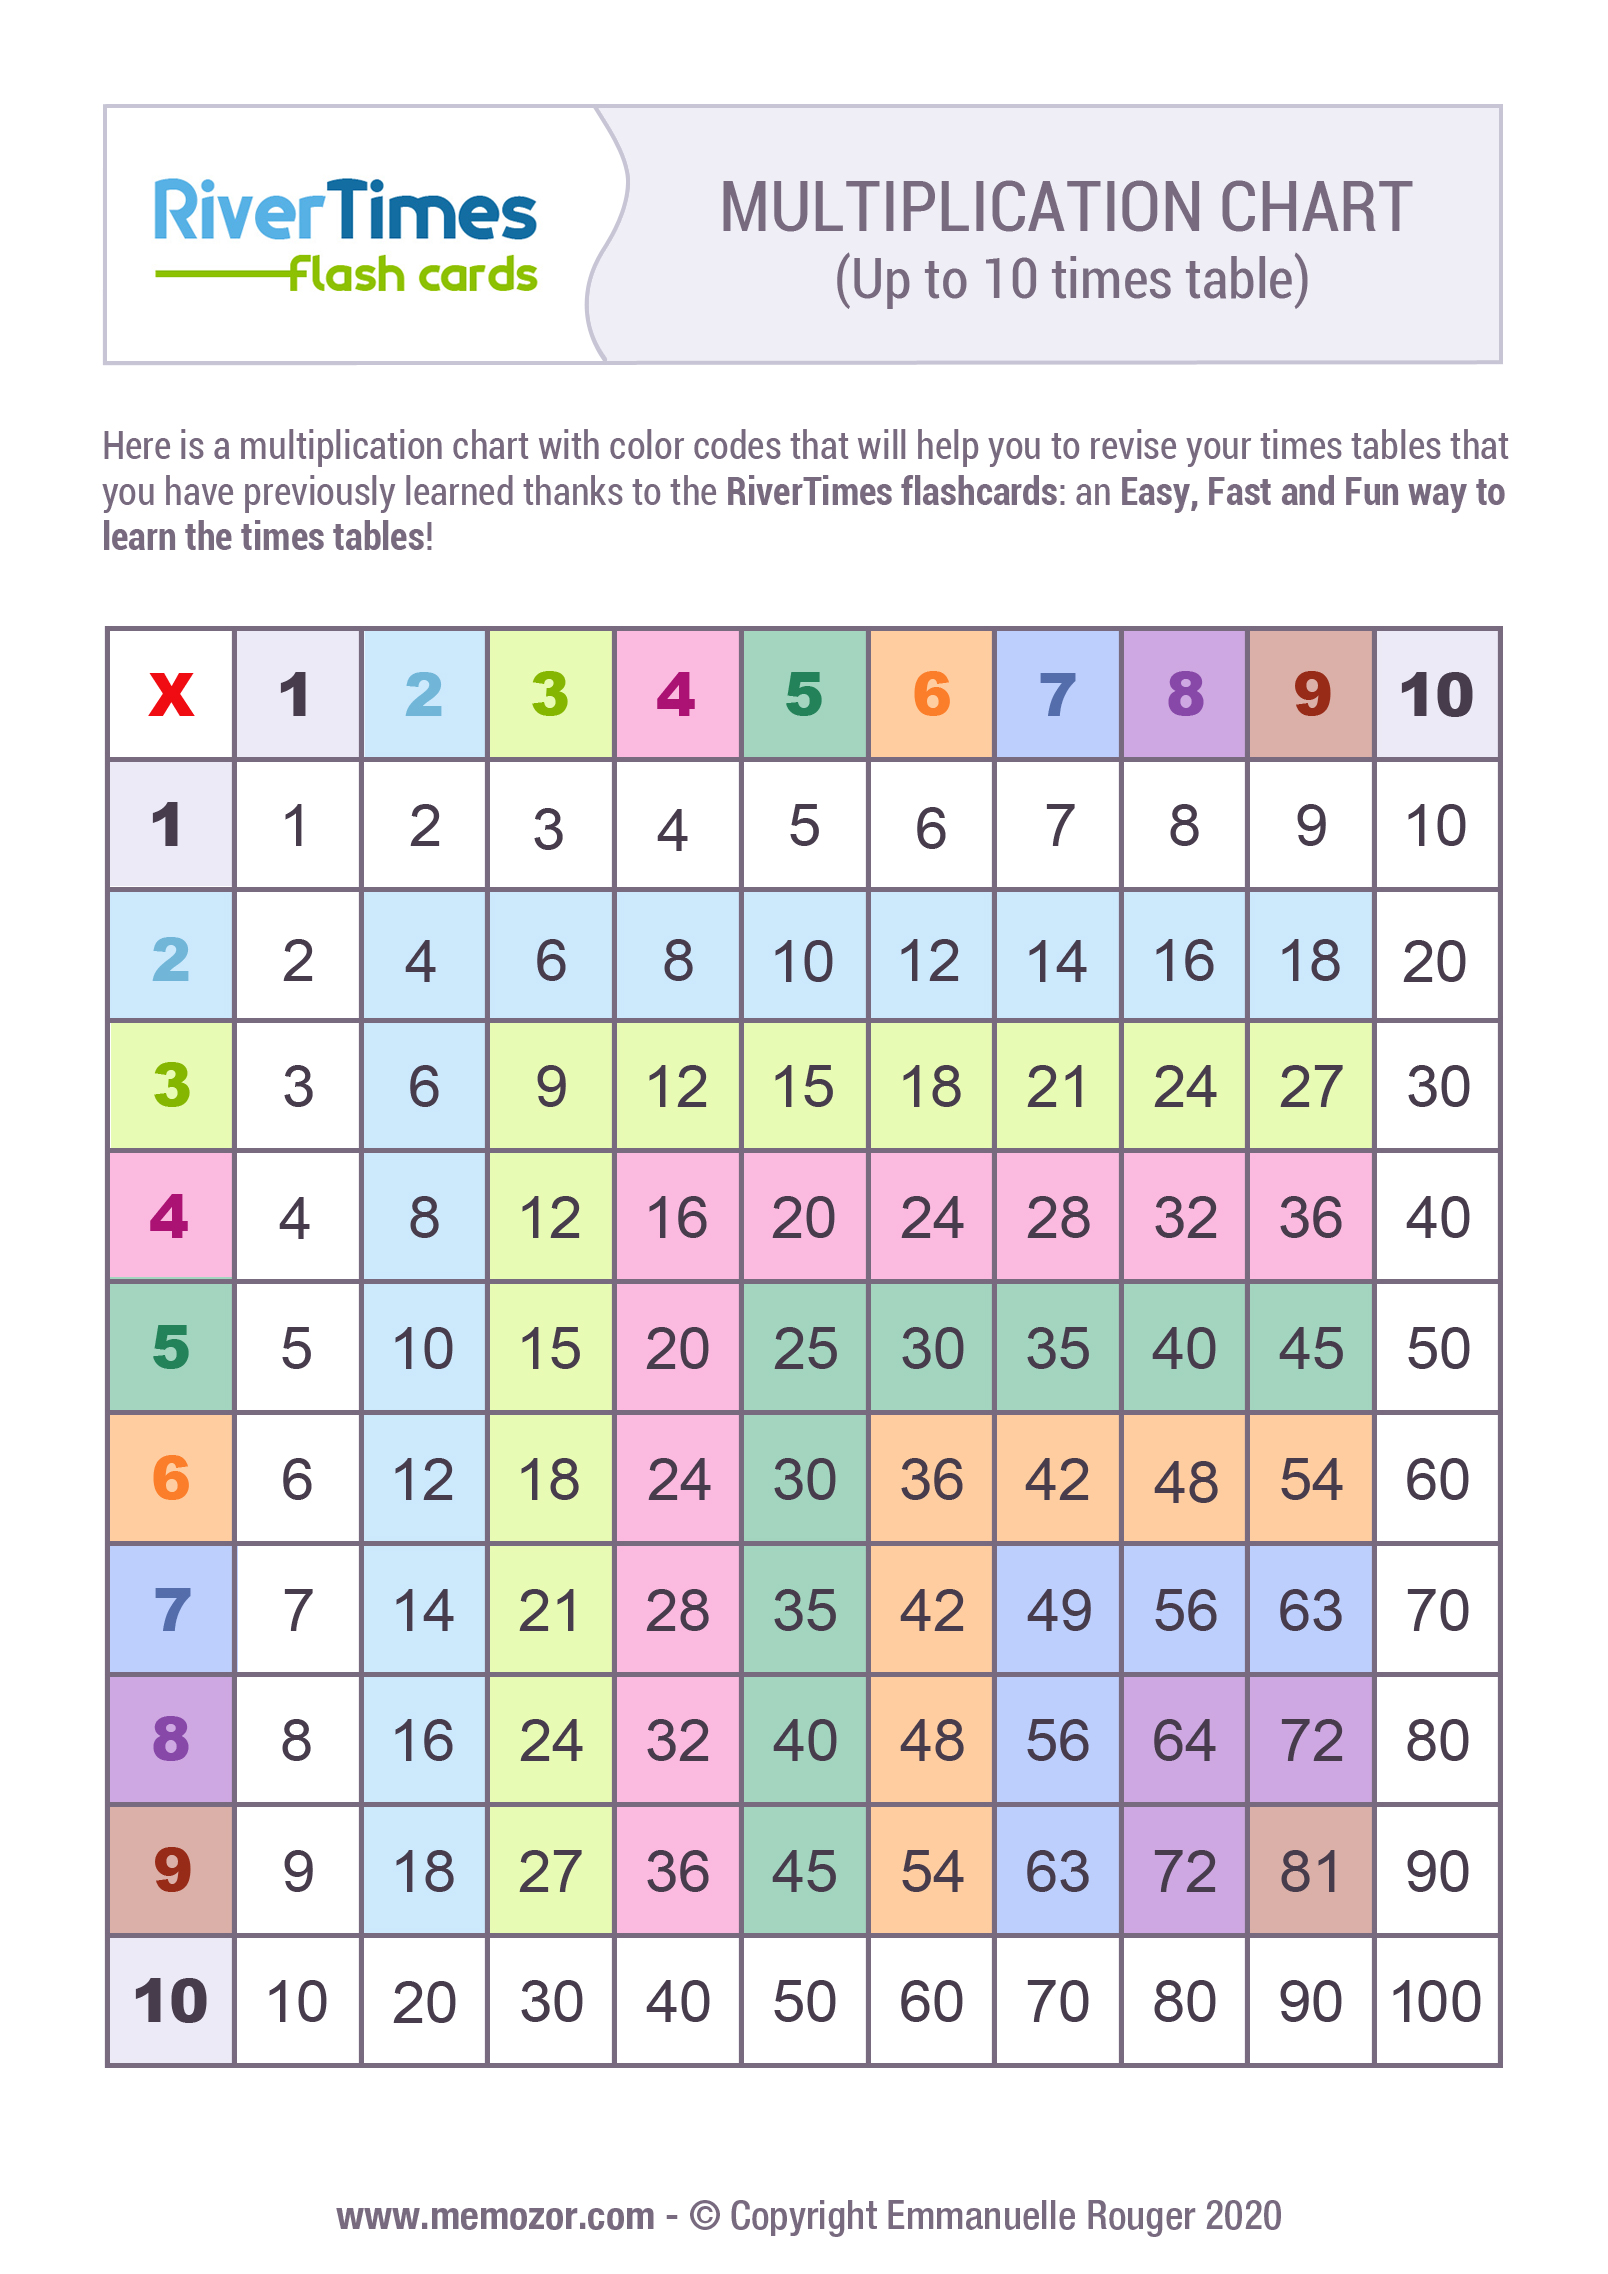 complete-colourful-multiplication-table-to-print-memozor